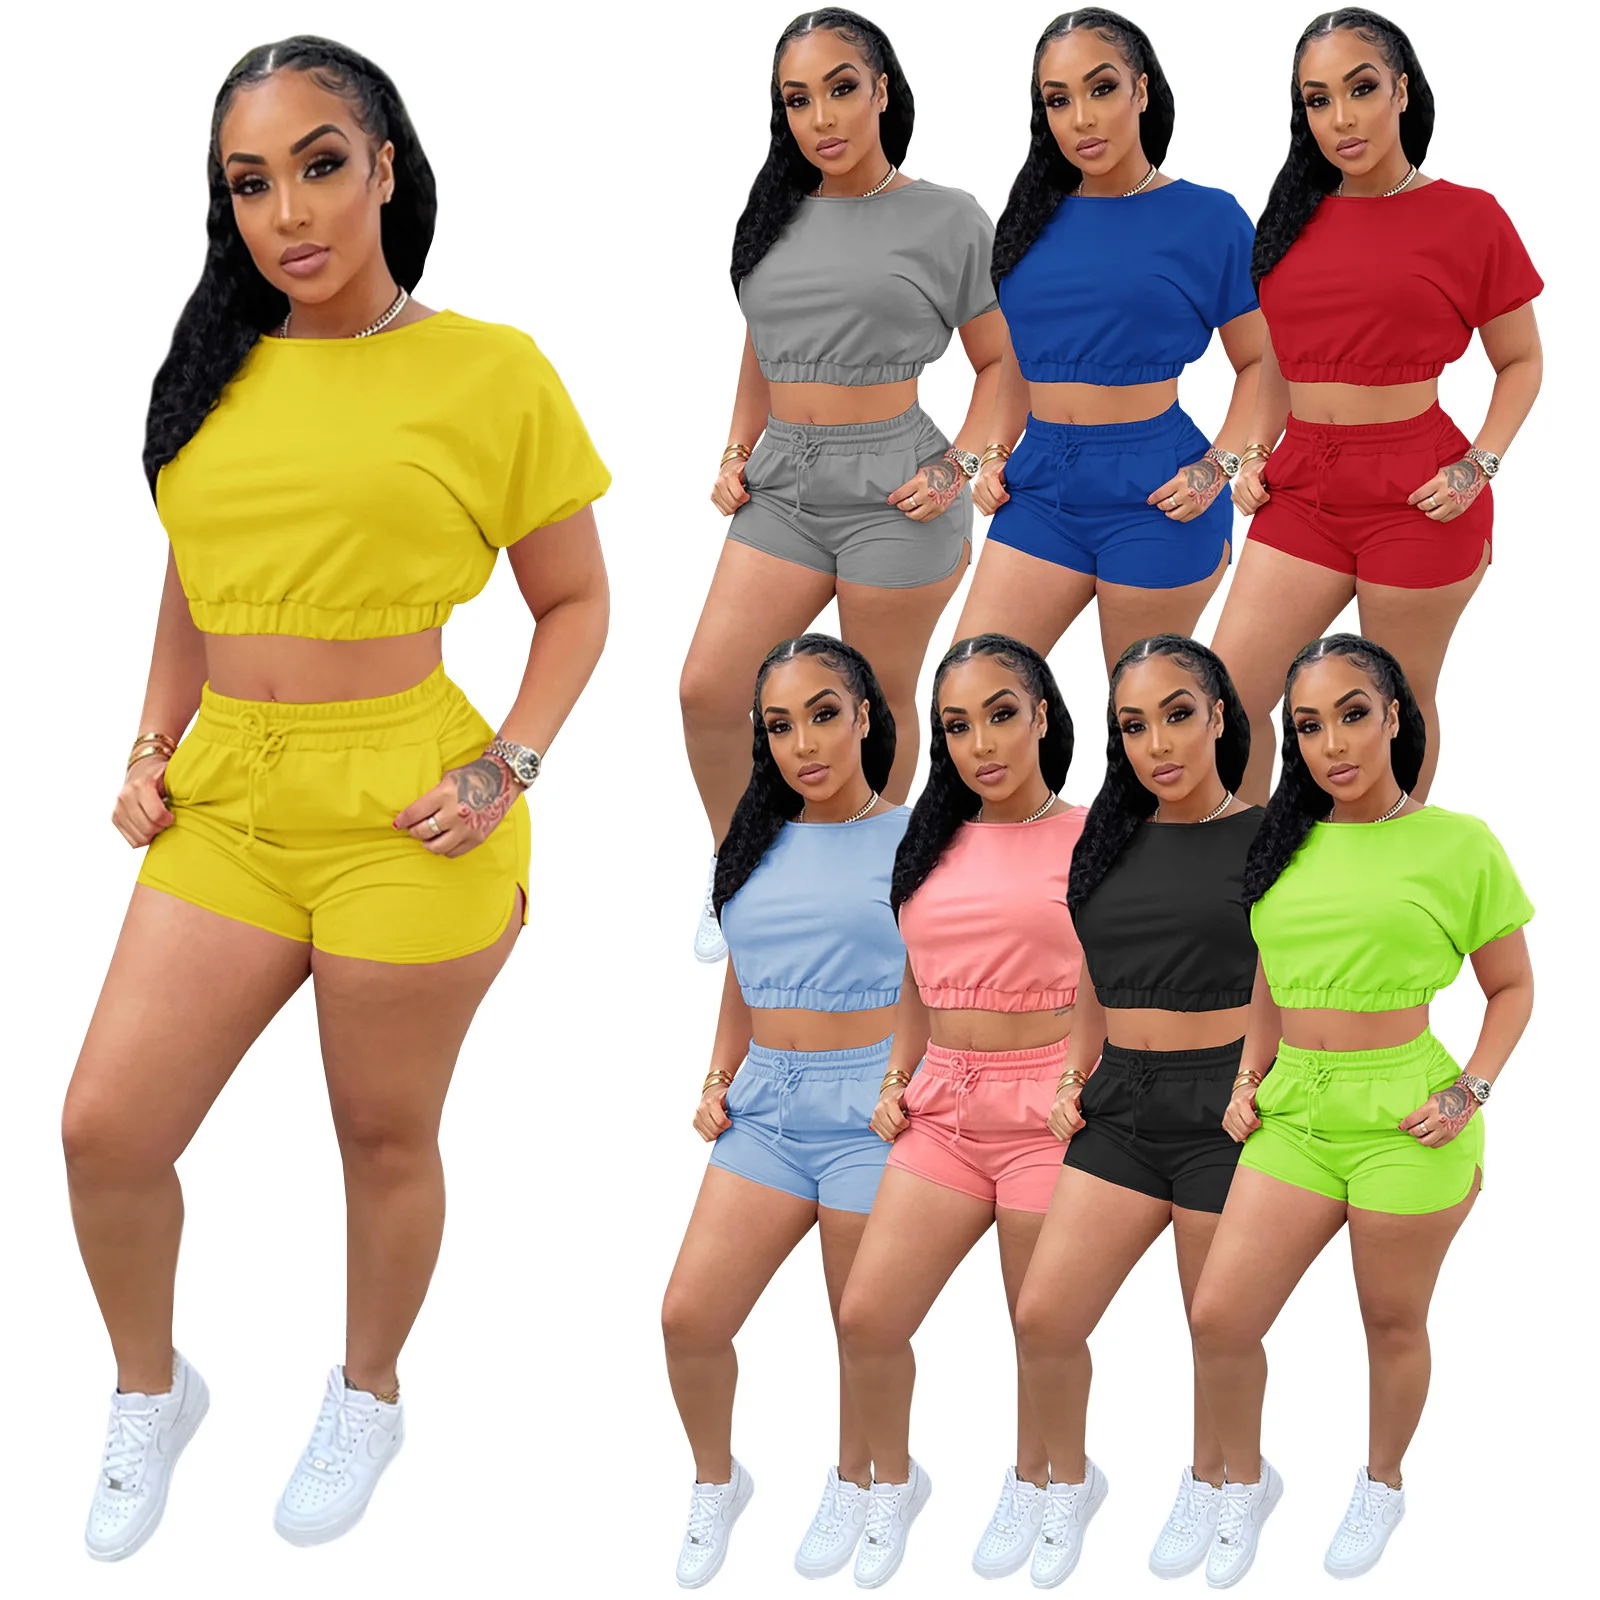 

2022 new casual plain custom logo summer clothes short sleeve crop top backless two piece shorts set biker jogging set for women, Different color